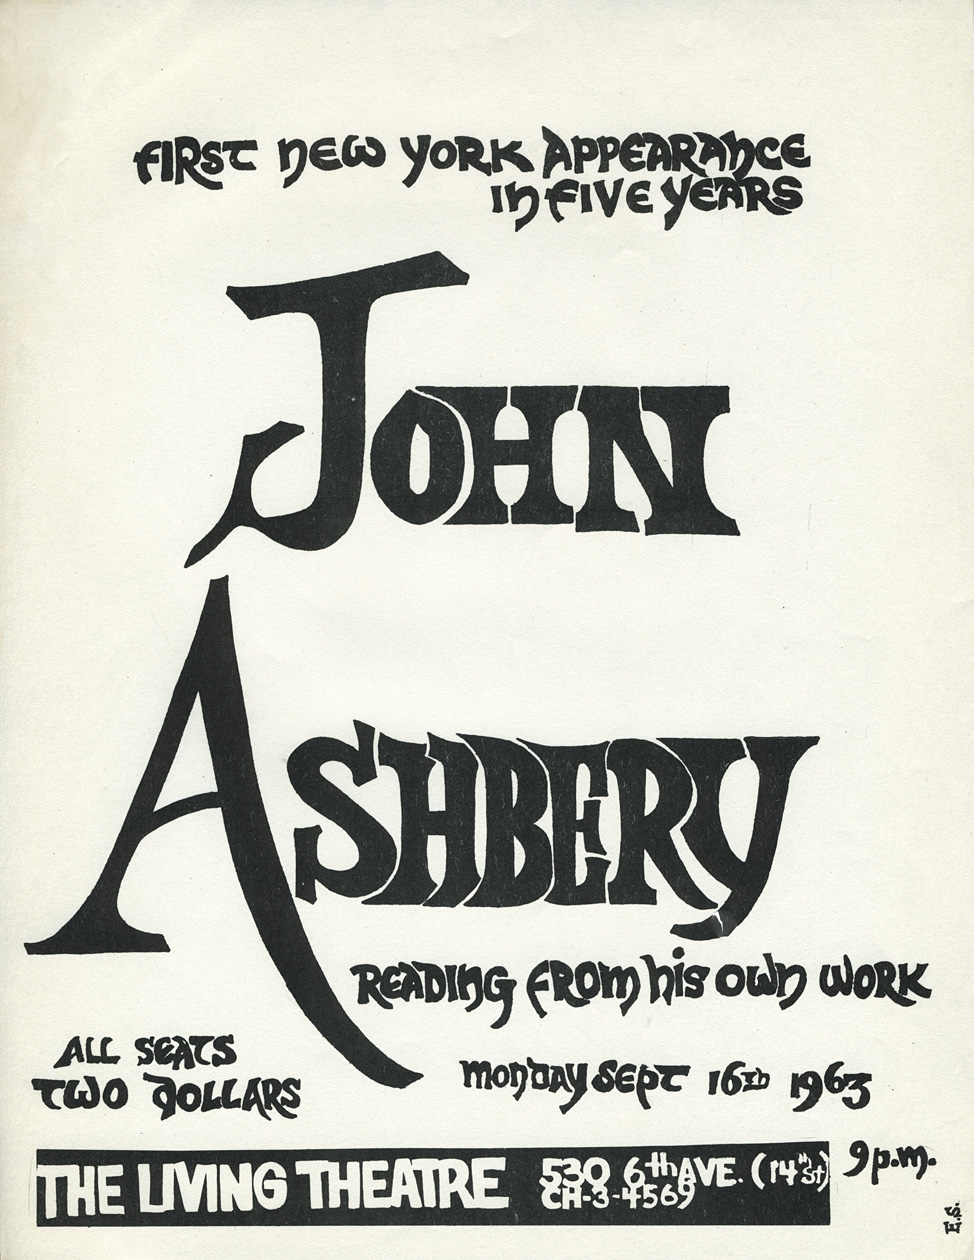 Flyer for John Ashbery’s “first New York Appearance in five years” at the Living Theatre, September 16, 1963. Artwork by Emma Silverman. 8 1/2 x 11 inches.